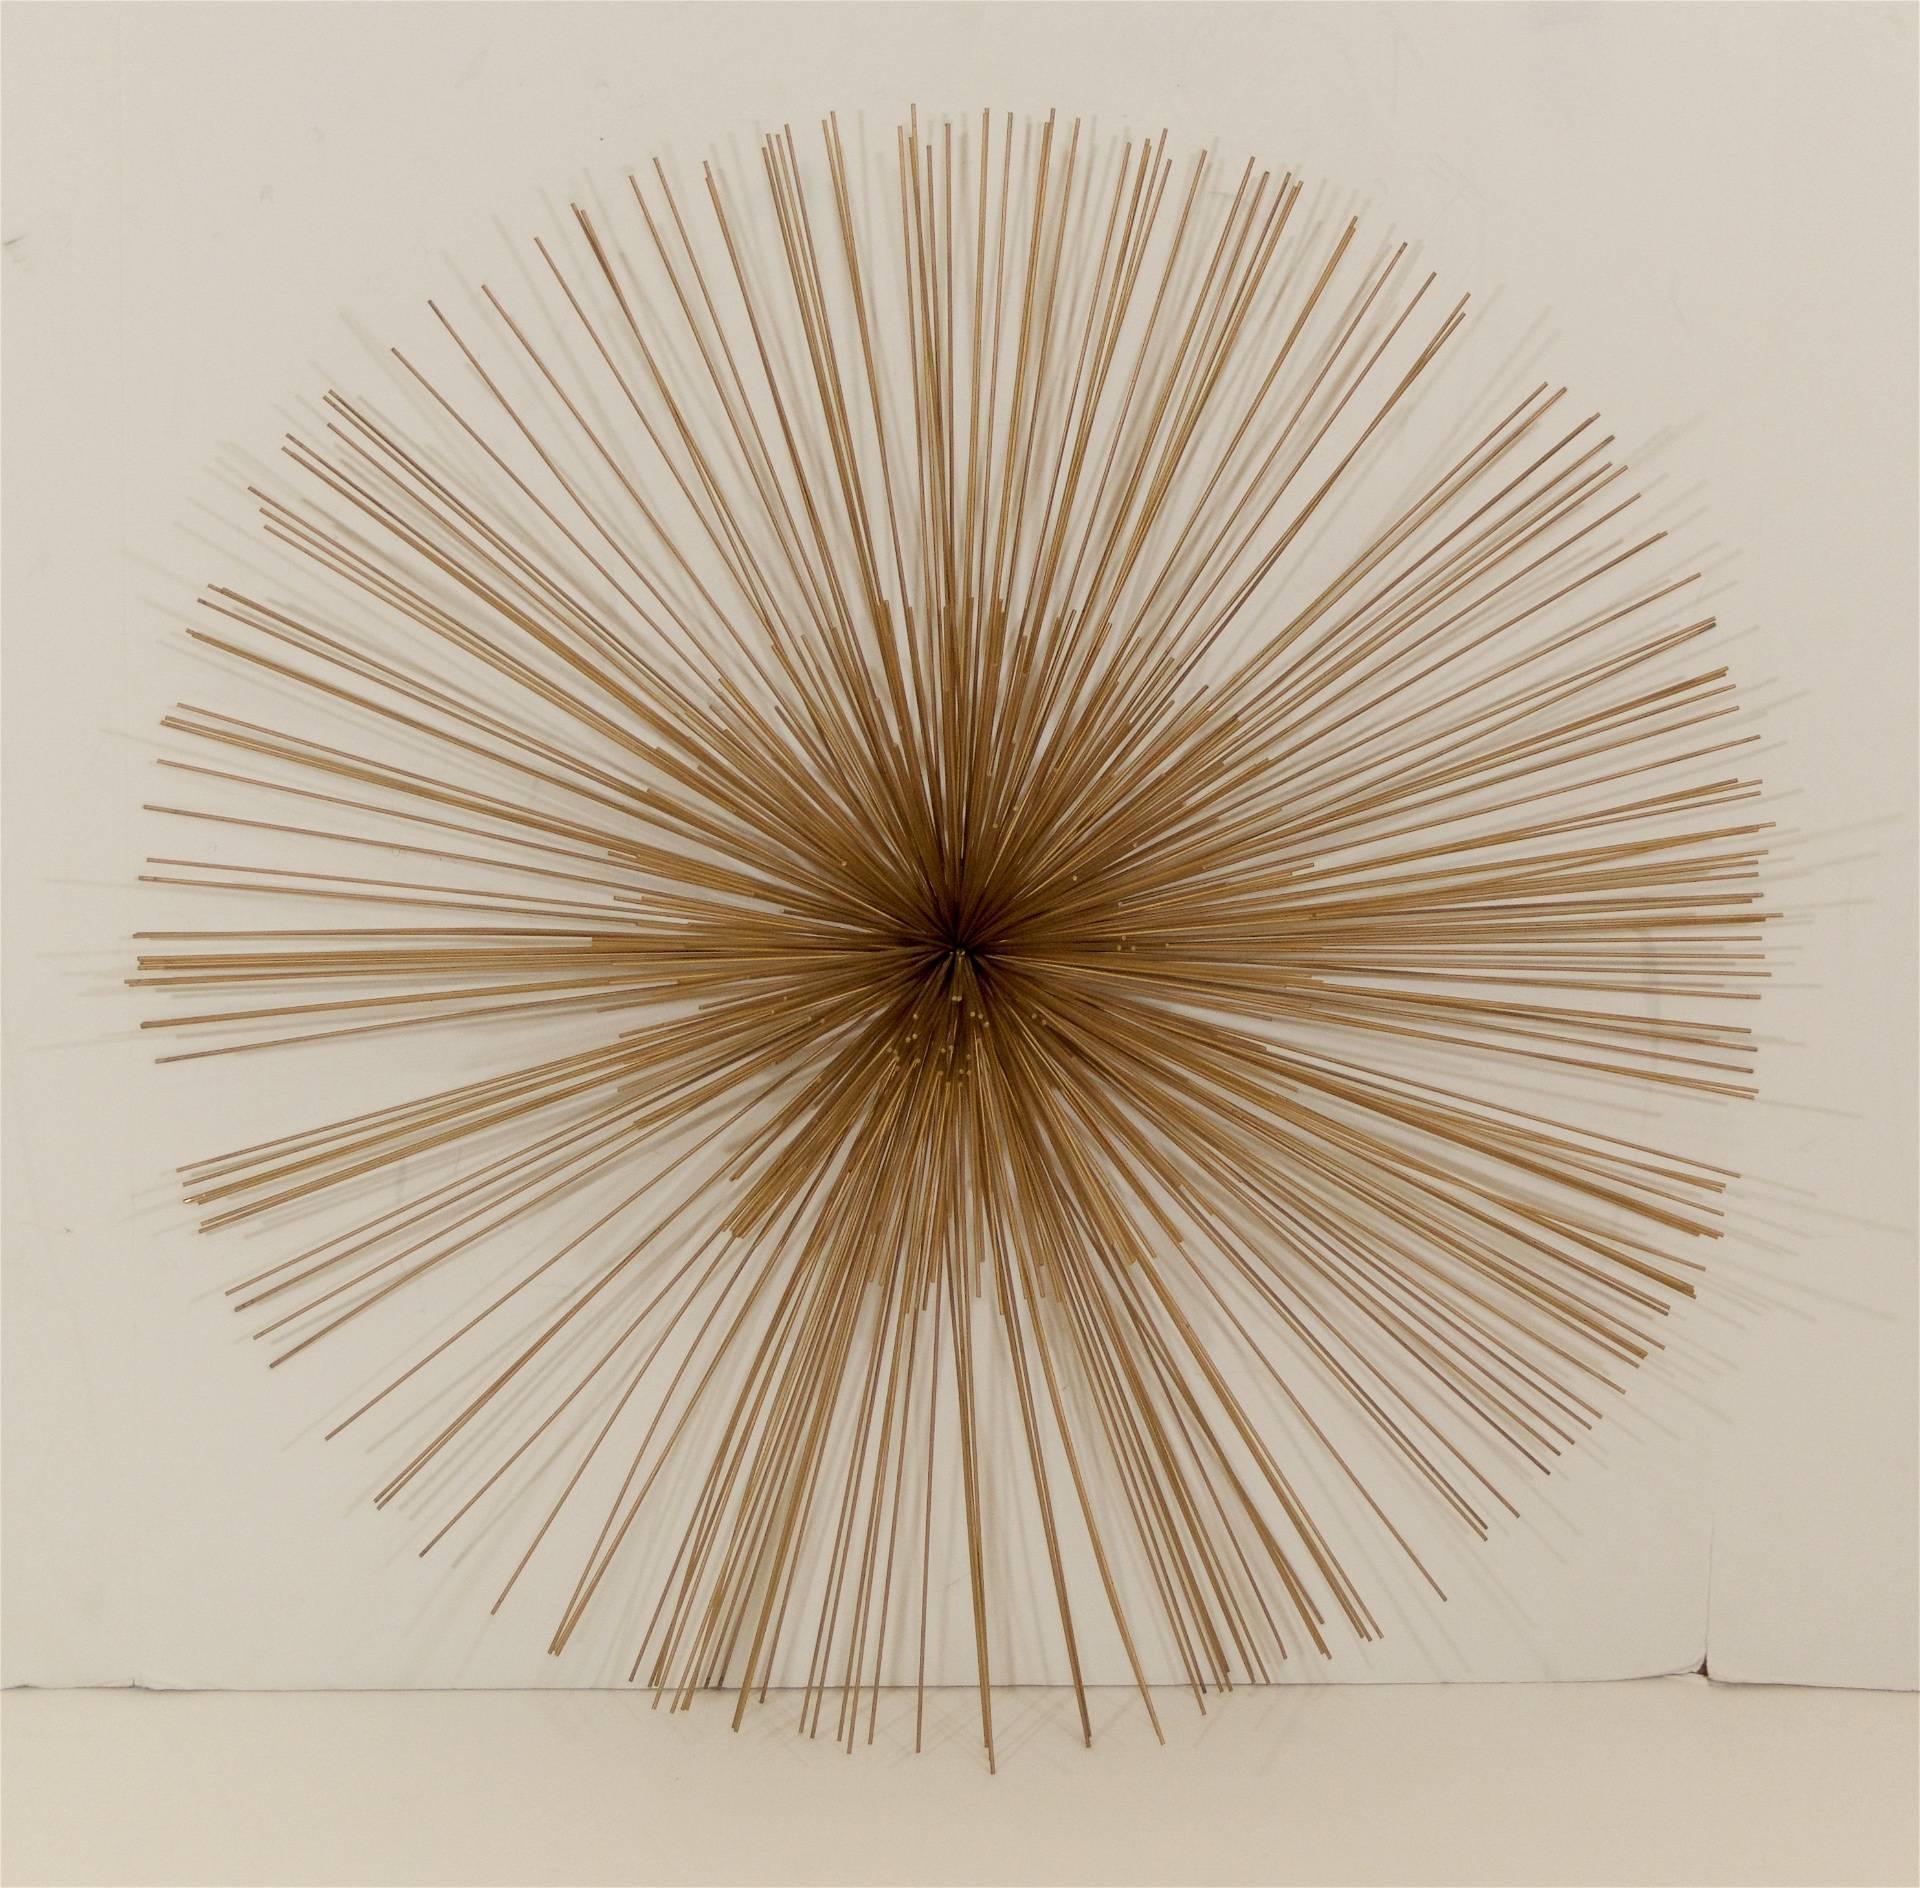 Gorgeous urchin wall hanging comprised of metal rods radiating from a central point.